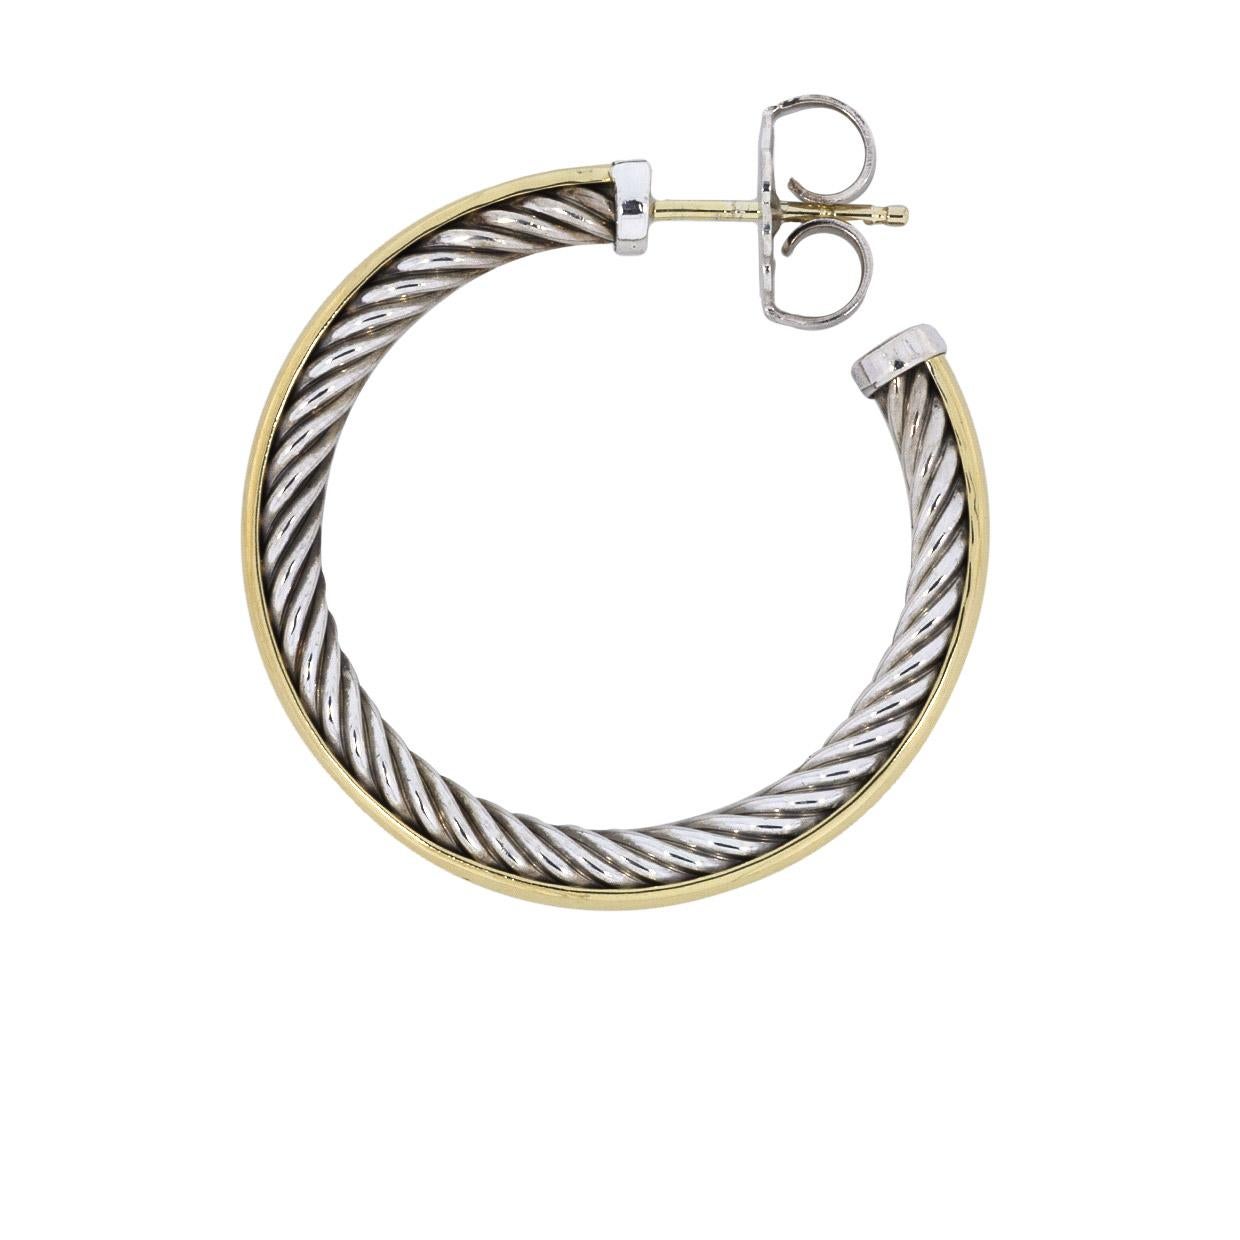 Item Details

Estimated Retail $650.00
Brand David Yurman
Collection CABLE
Metal Mixed Metals
Finish Polished
Style Hoop
Fastening Butterfly/Tension
Diameter $32.00 mm
Metal Purity 18k

The history of David Yurman begins in the 1960s in New York